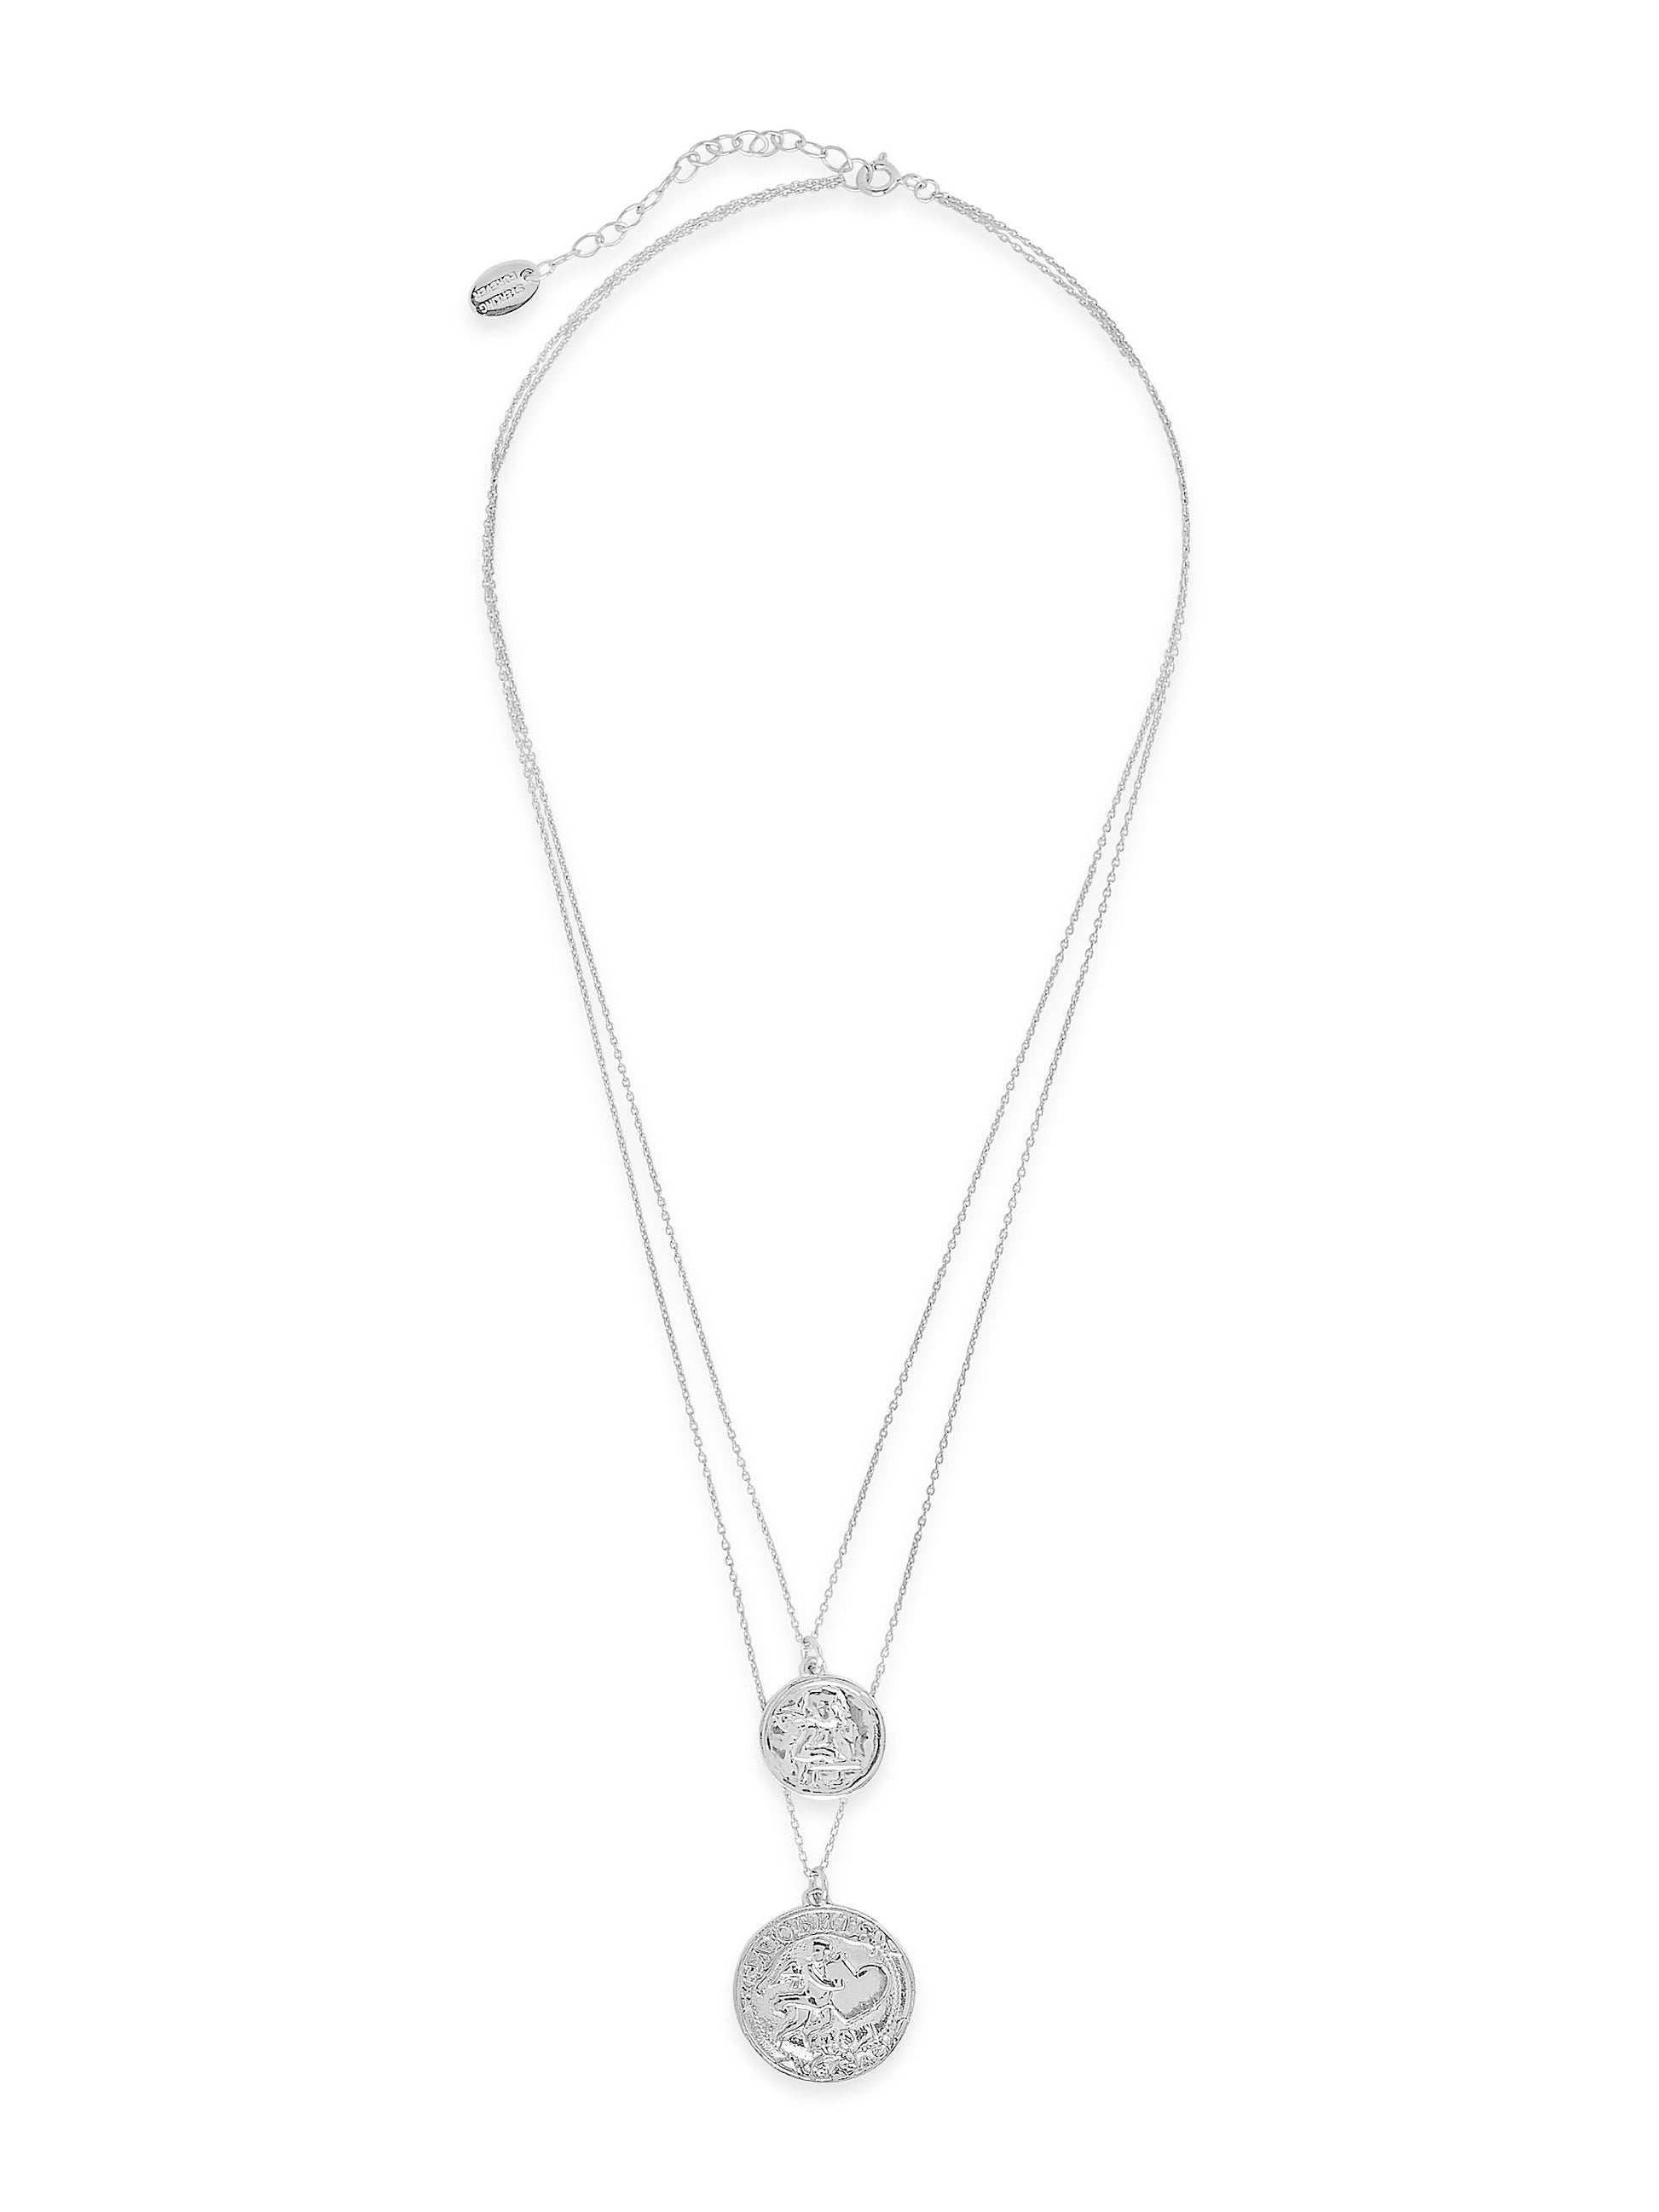 2 Layer Charm Necklace - Sterling Forever